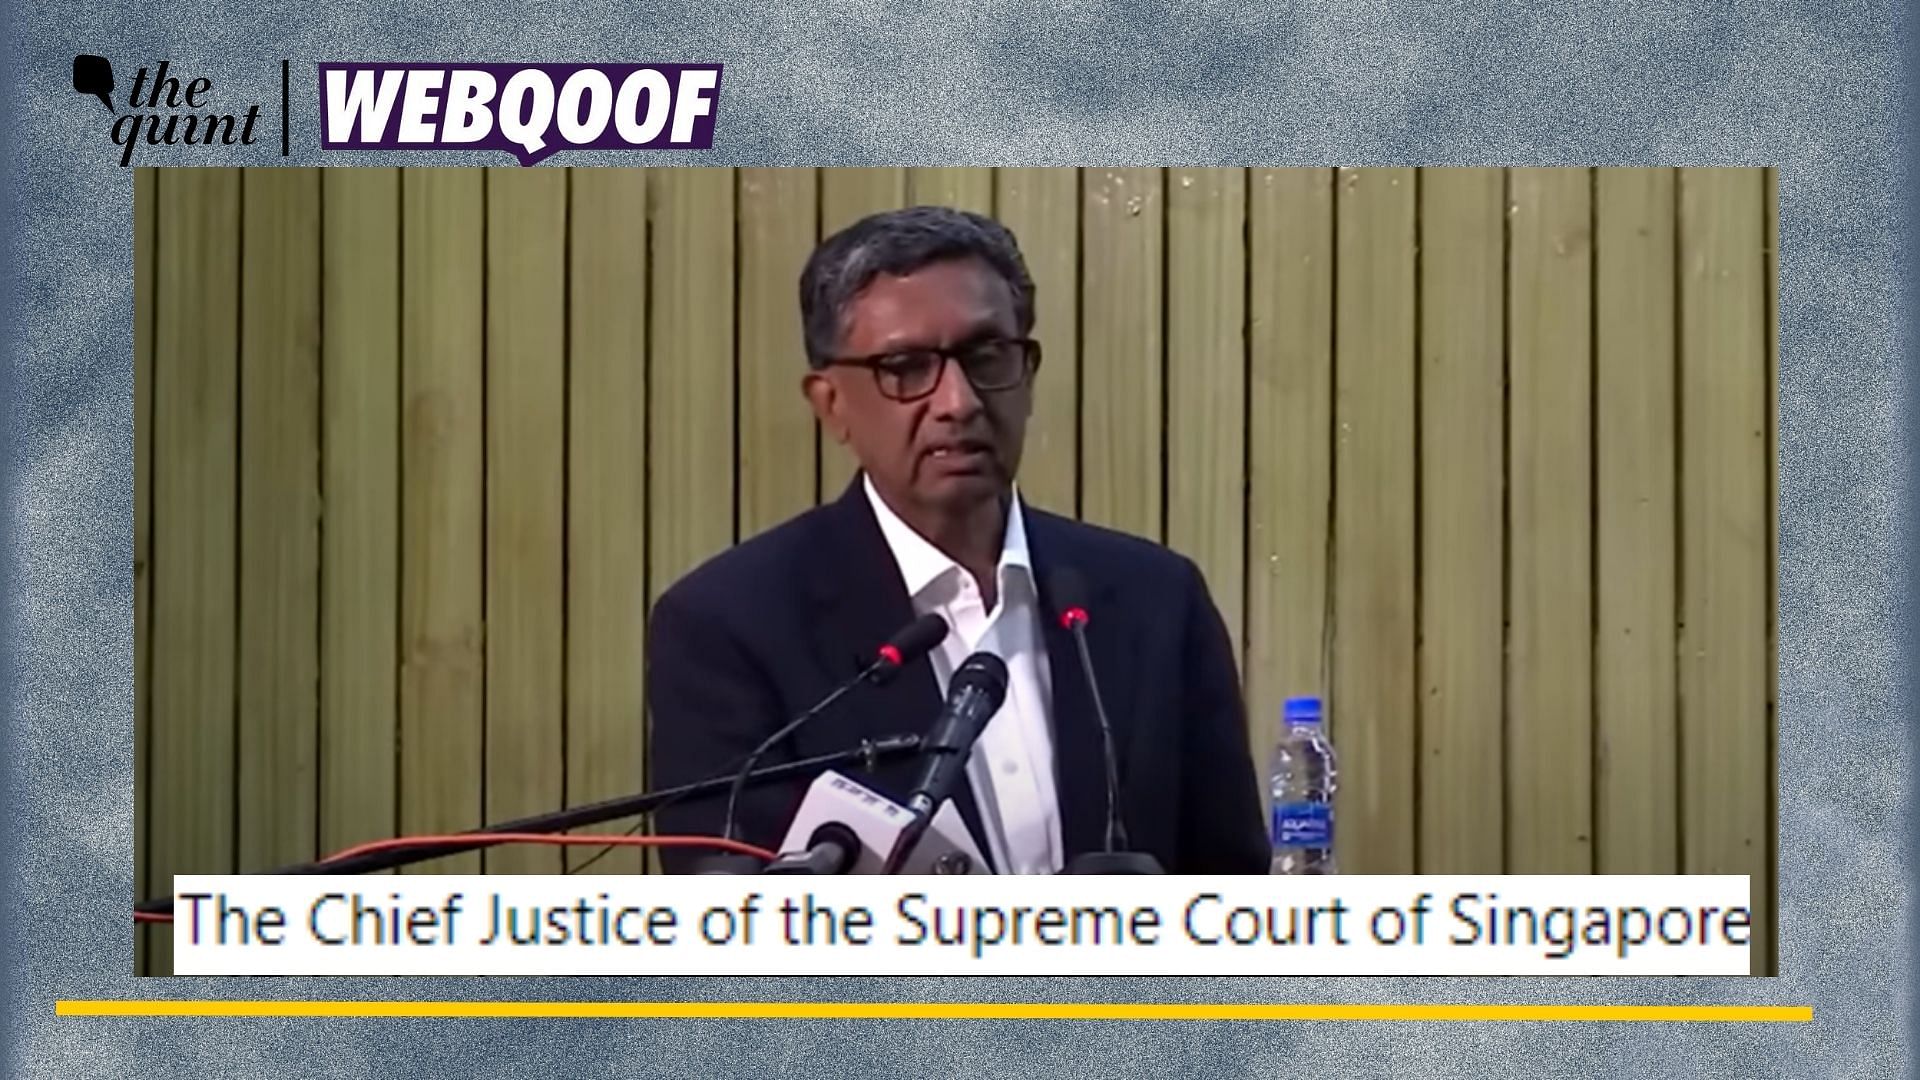 <div class="paragraphs"><p>Fact-Check | The video does not show the Chief Justice of Singapore speaking on Indian judiciary.</p></div>